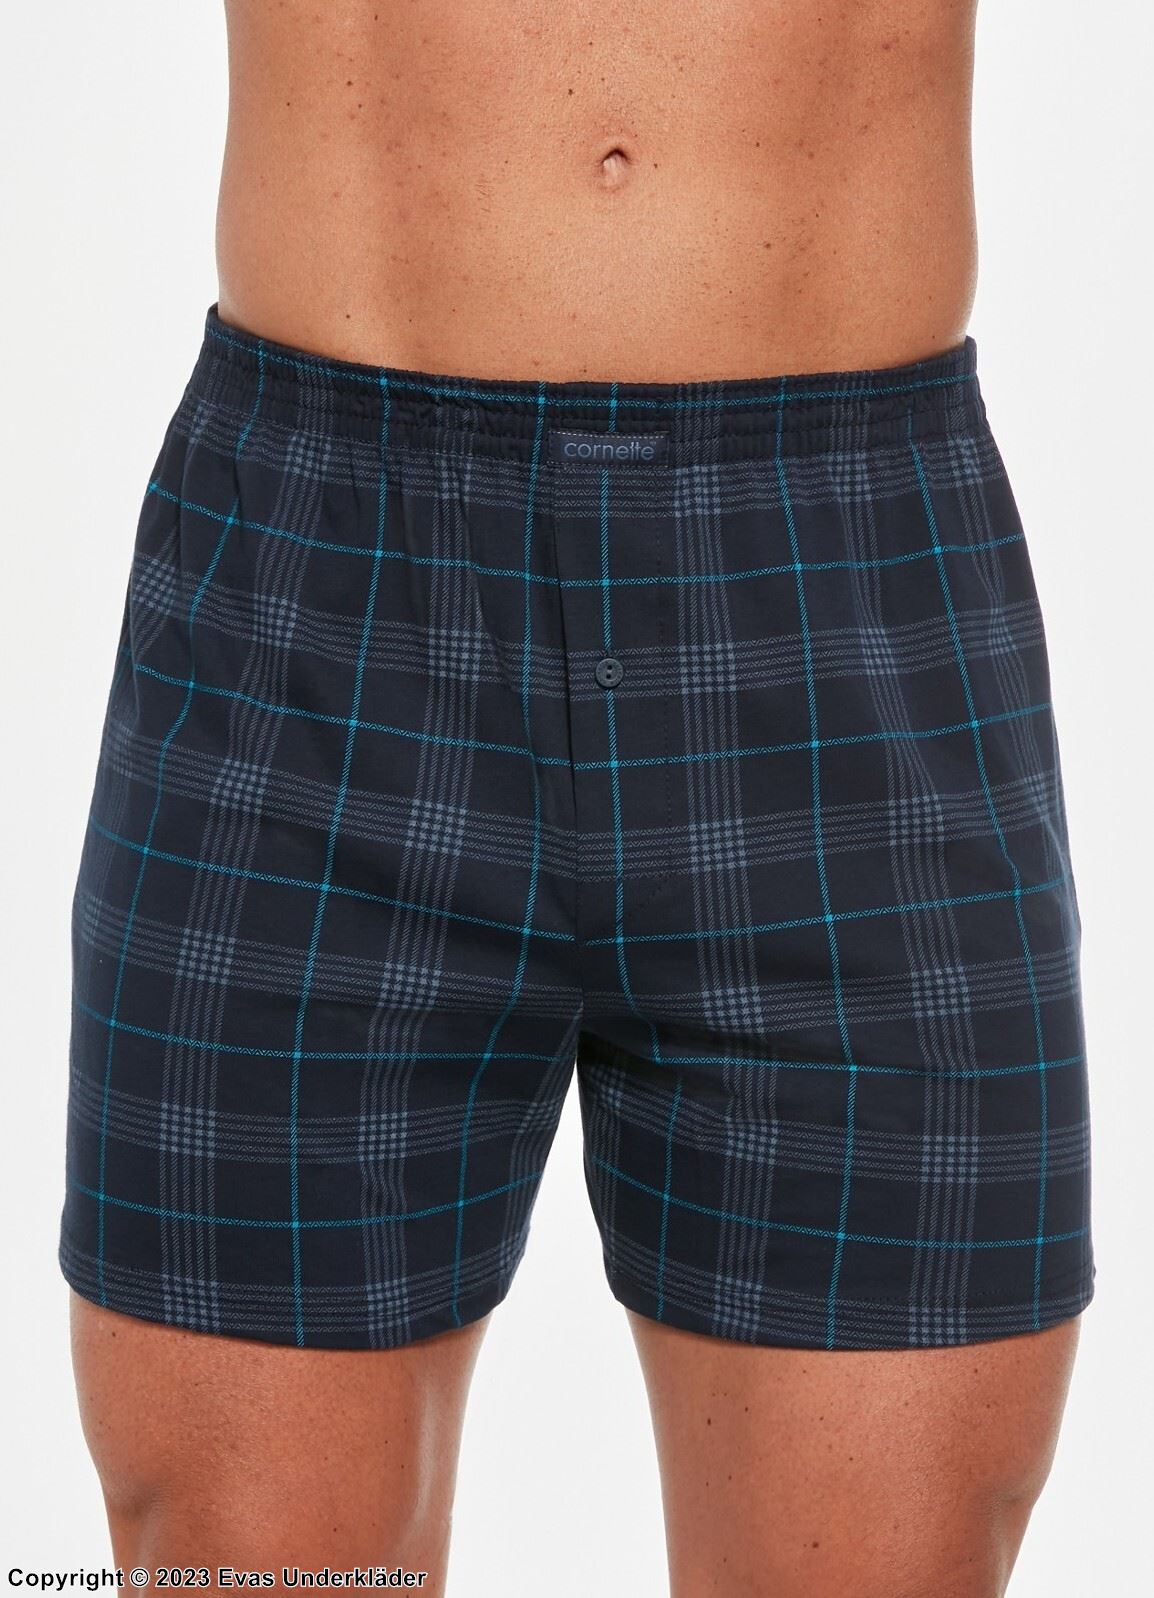 Men's boxer briefs, high quality cotton, without fly, scott-checkered pattern